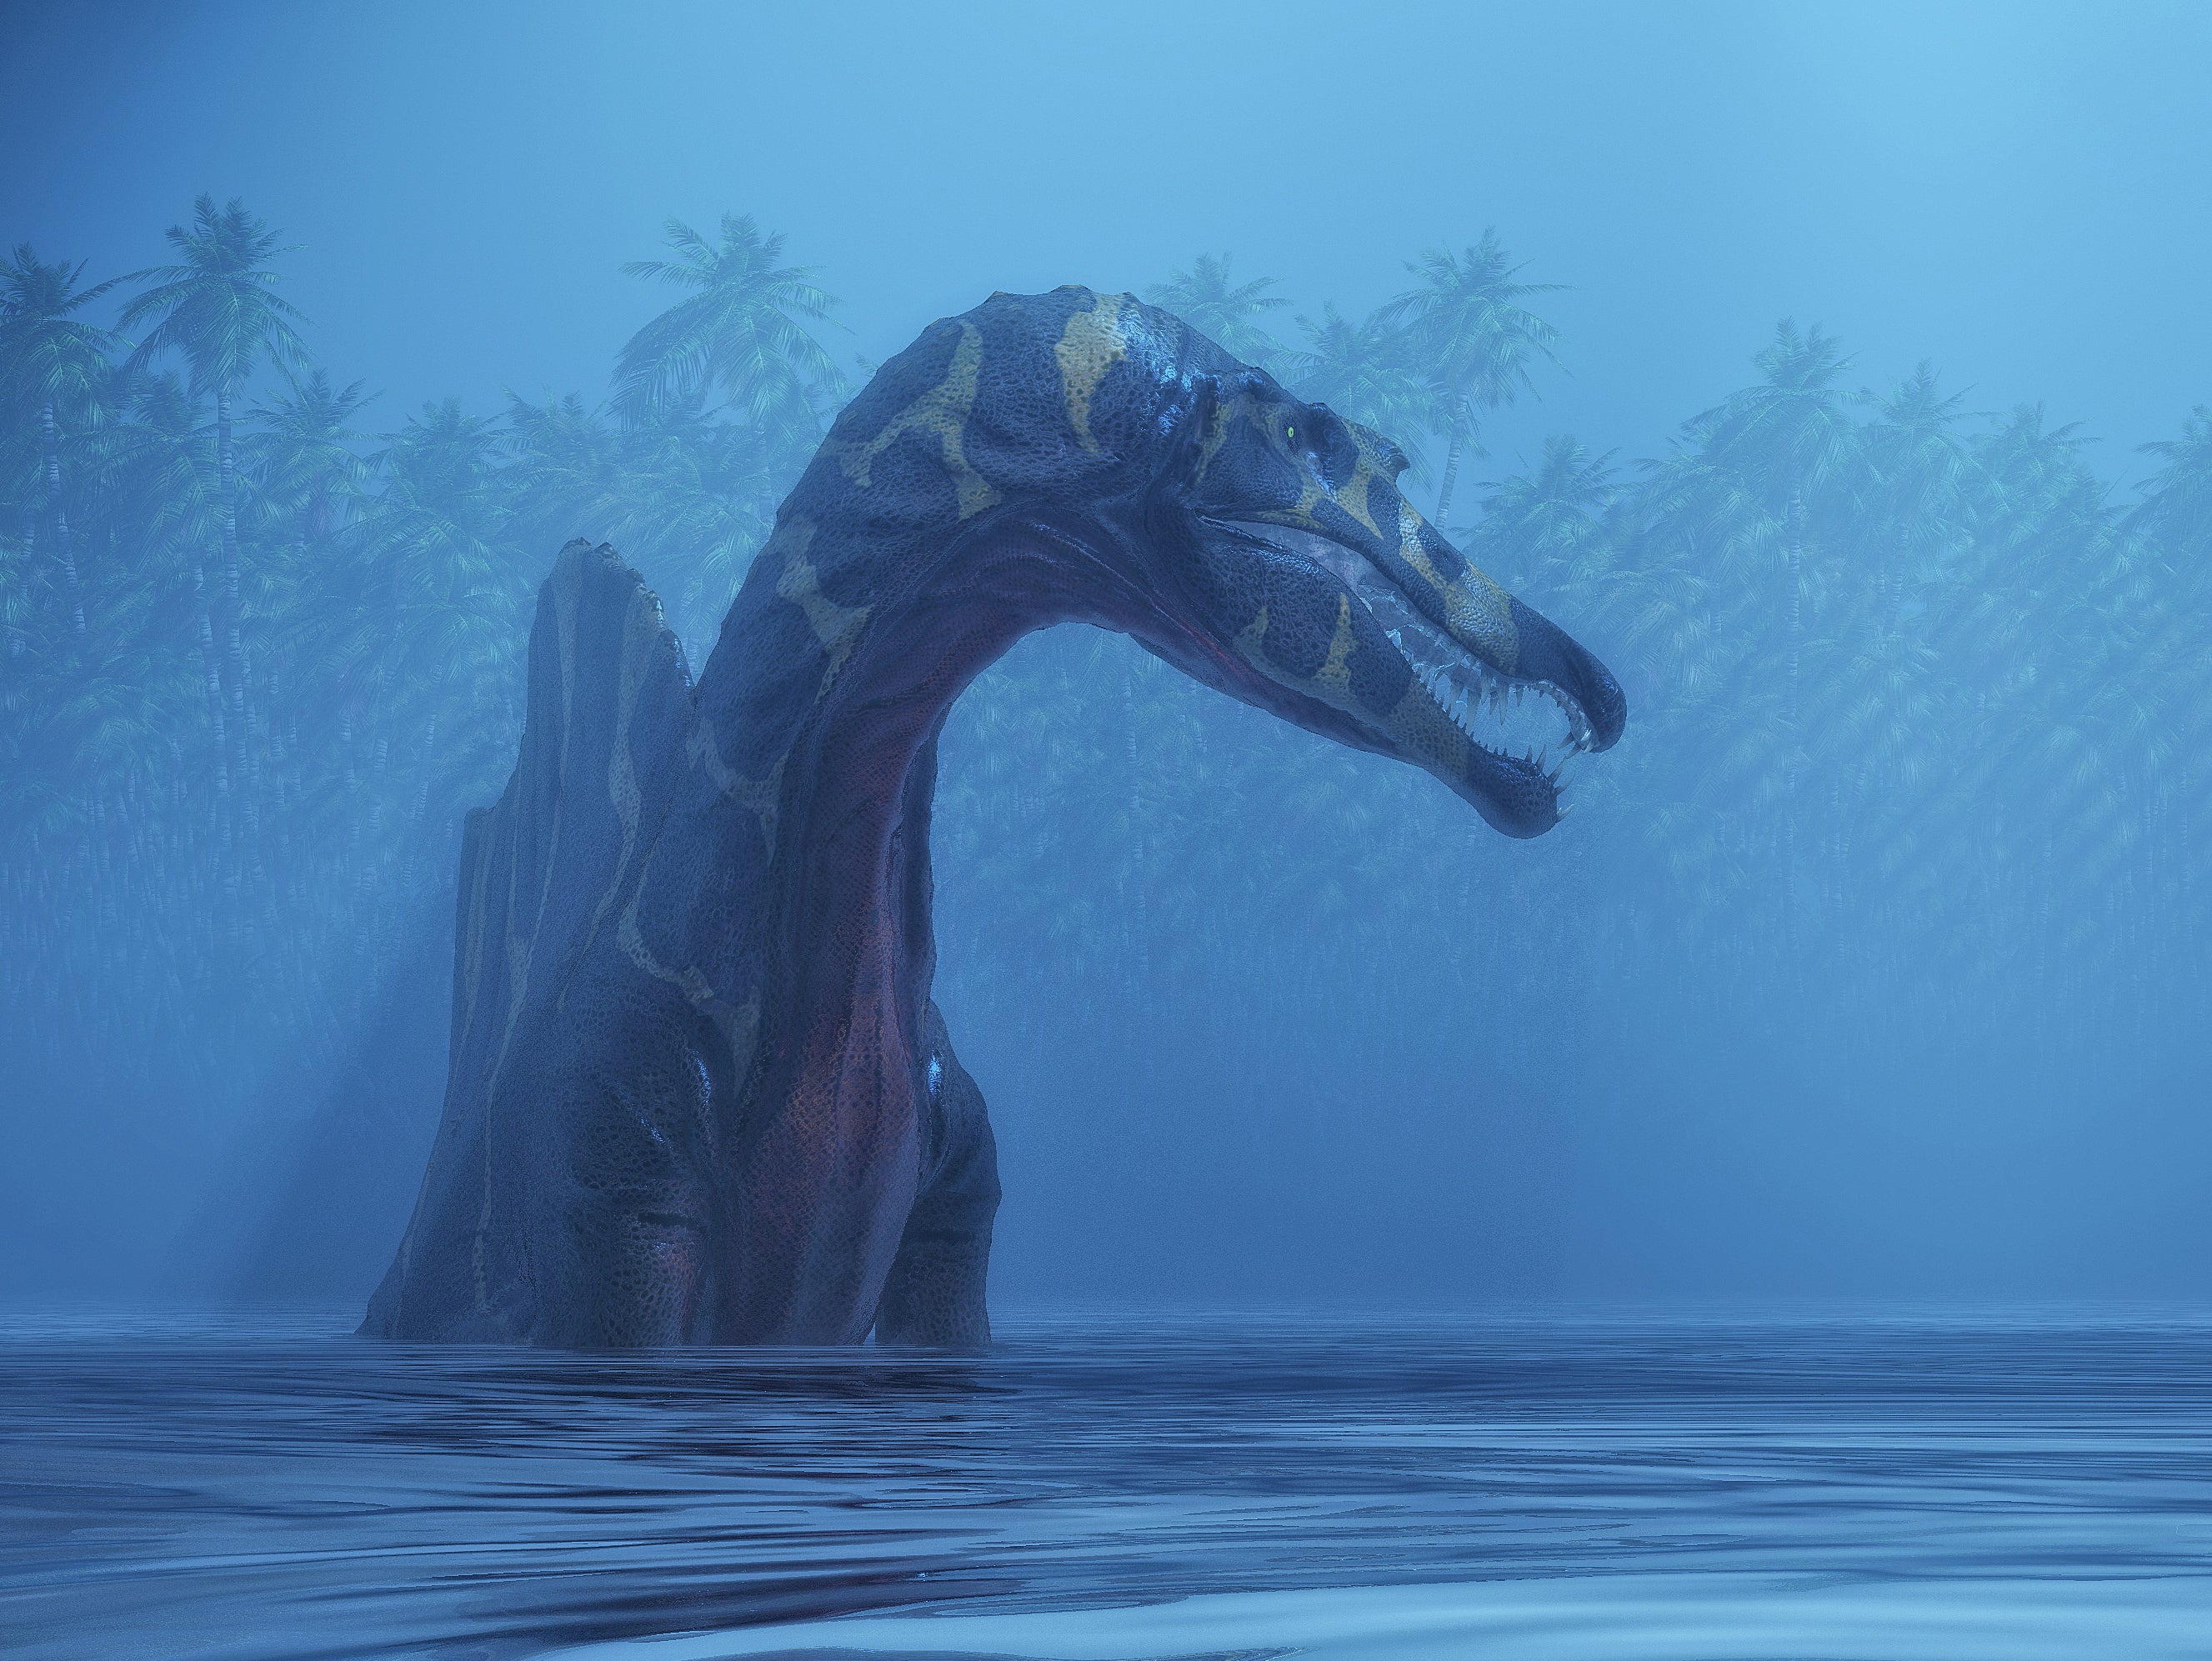 Spinosaurus may have swum to survive